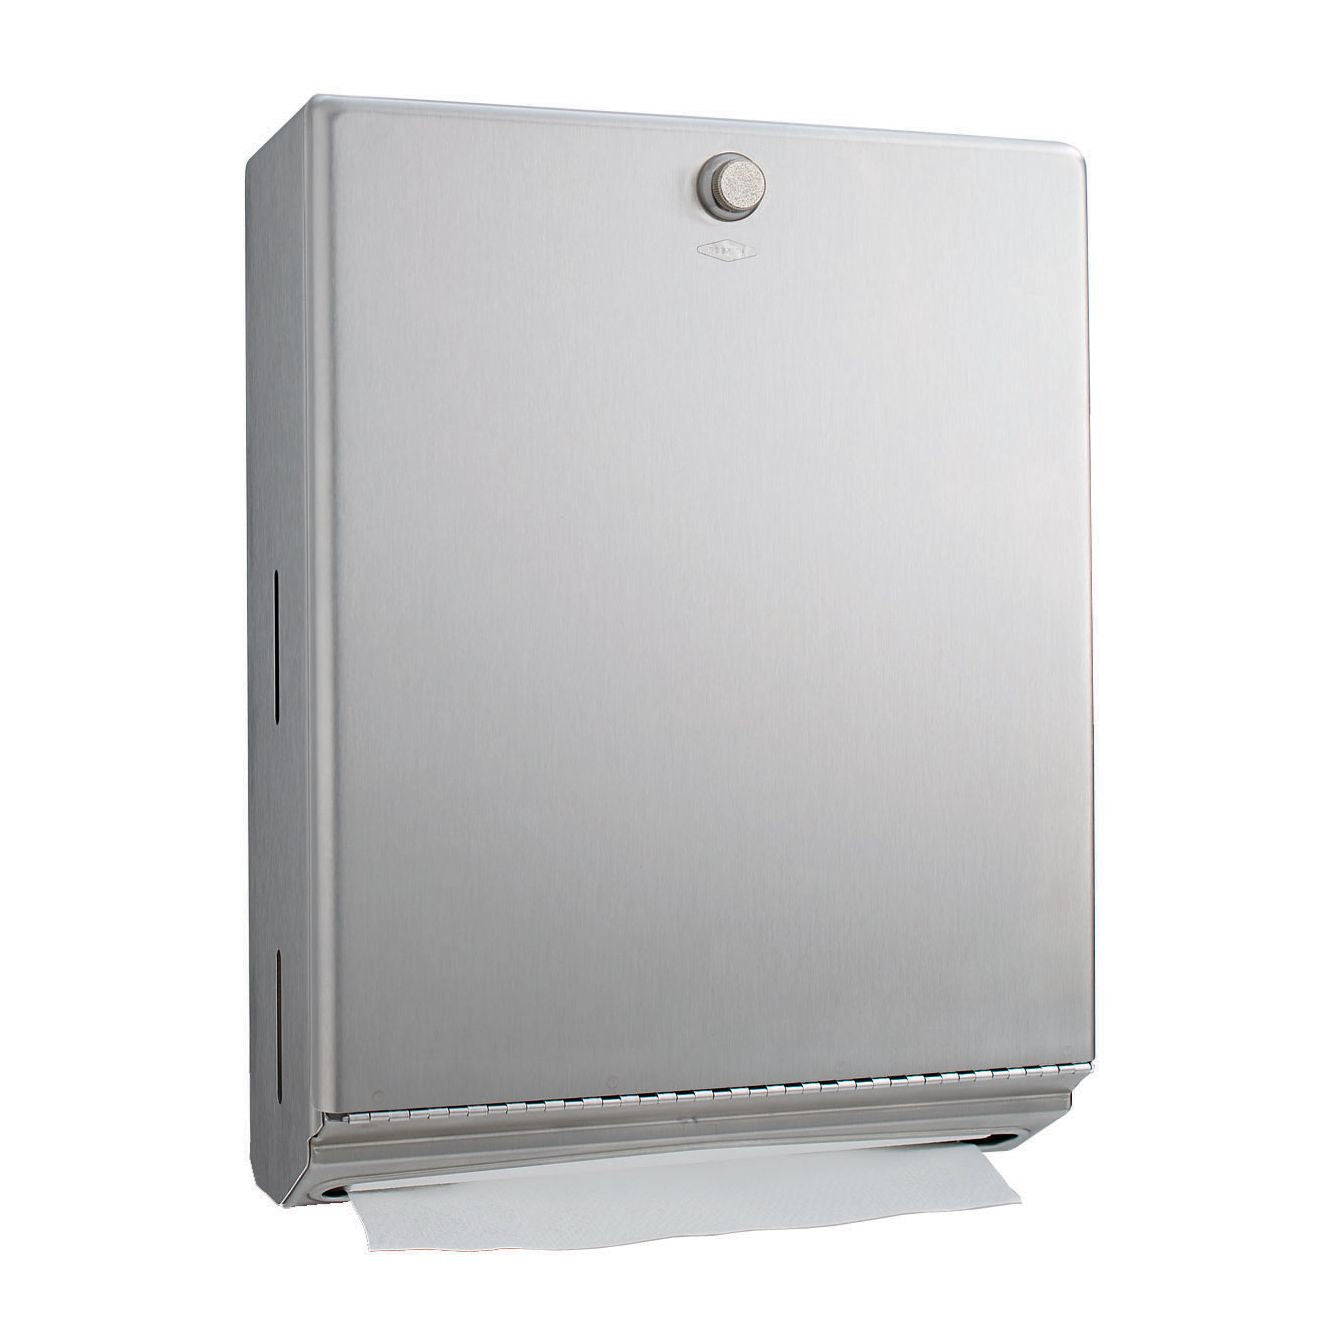 Bobrick 2620 - ClassicSeries Surface Mounted Paper Towel Dispenser in Satin Stainless Steel